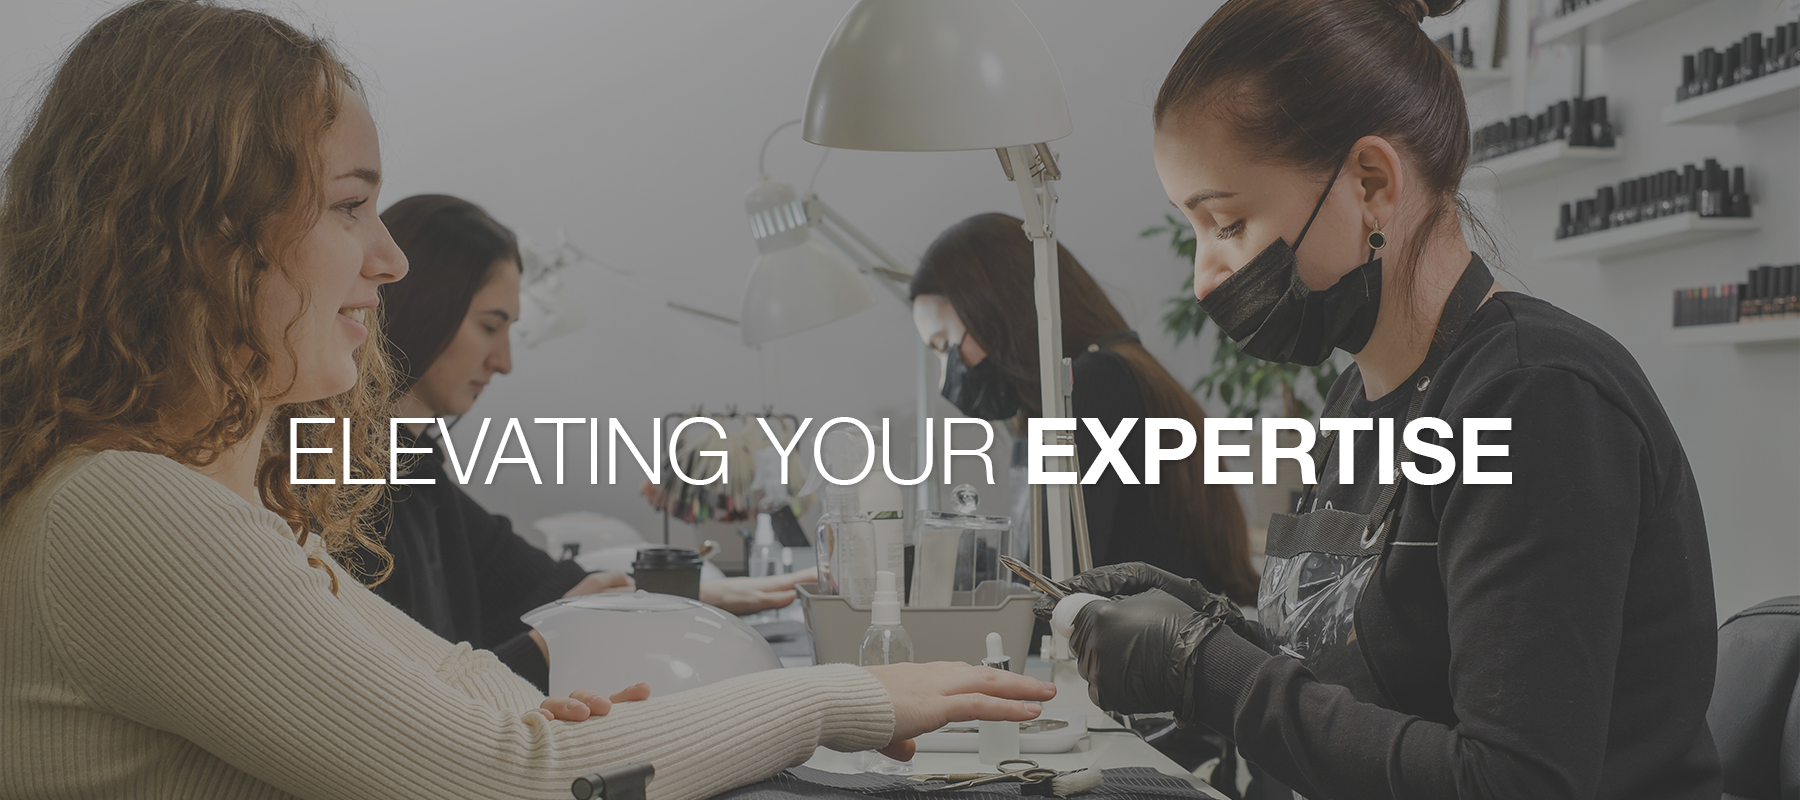 Elevating Expertise: The Power of Professional Development in the Nail Industry